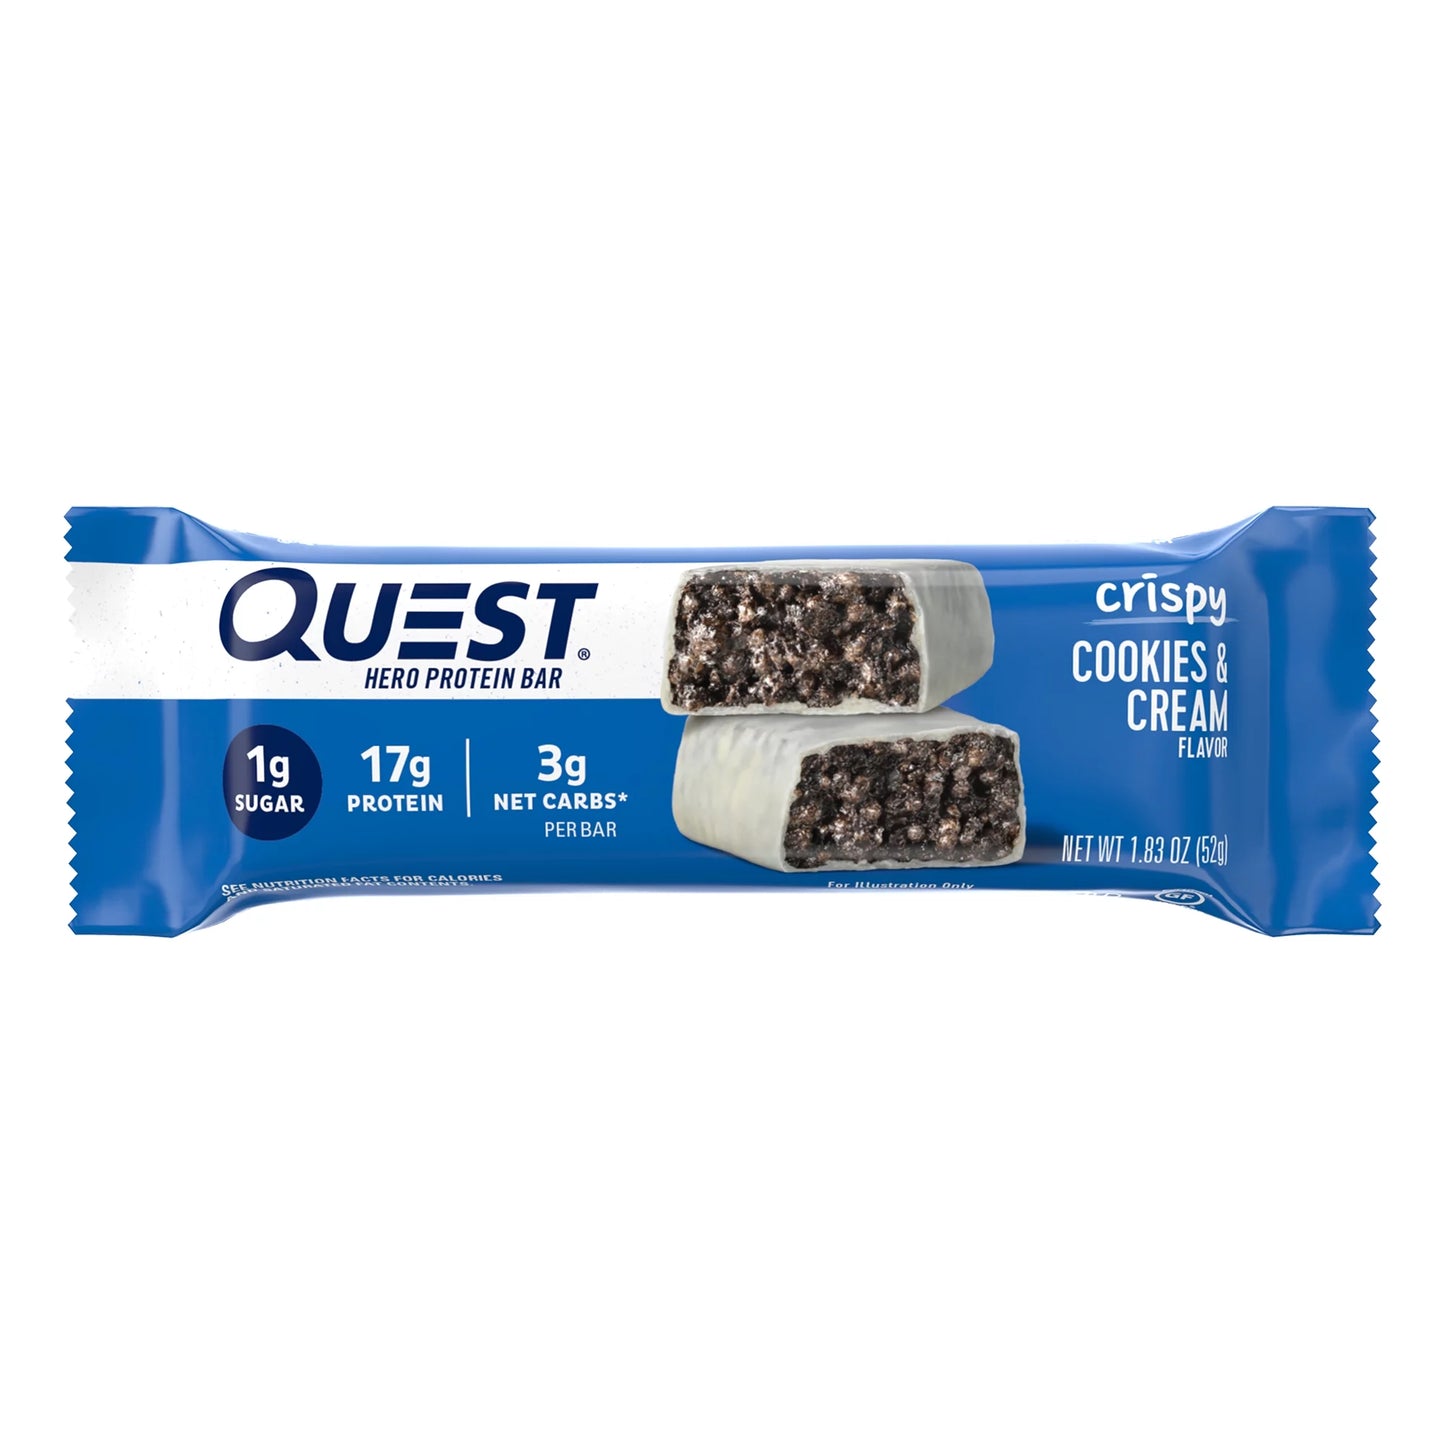 (3 Pack) , Hero Protein Bars, Low Carb, Gluten Free, Cookies & Cream, 4 Ct